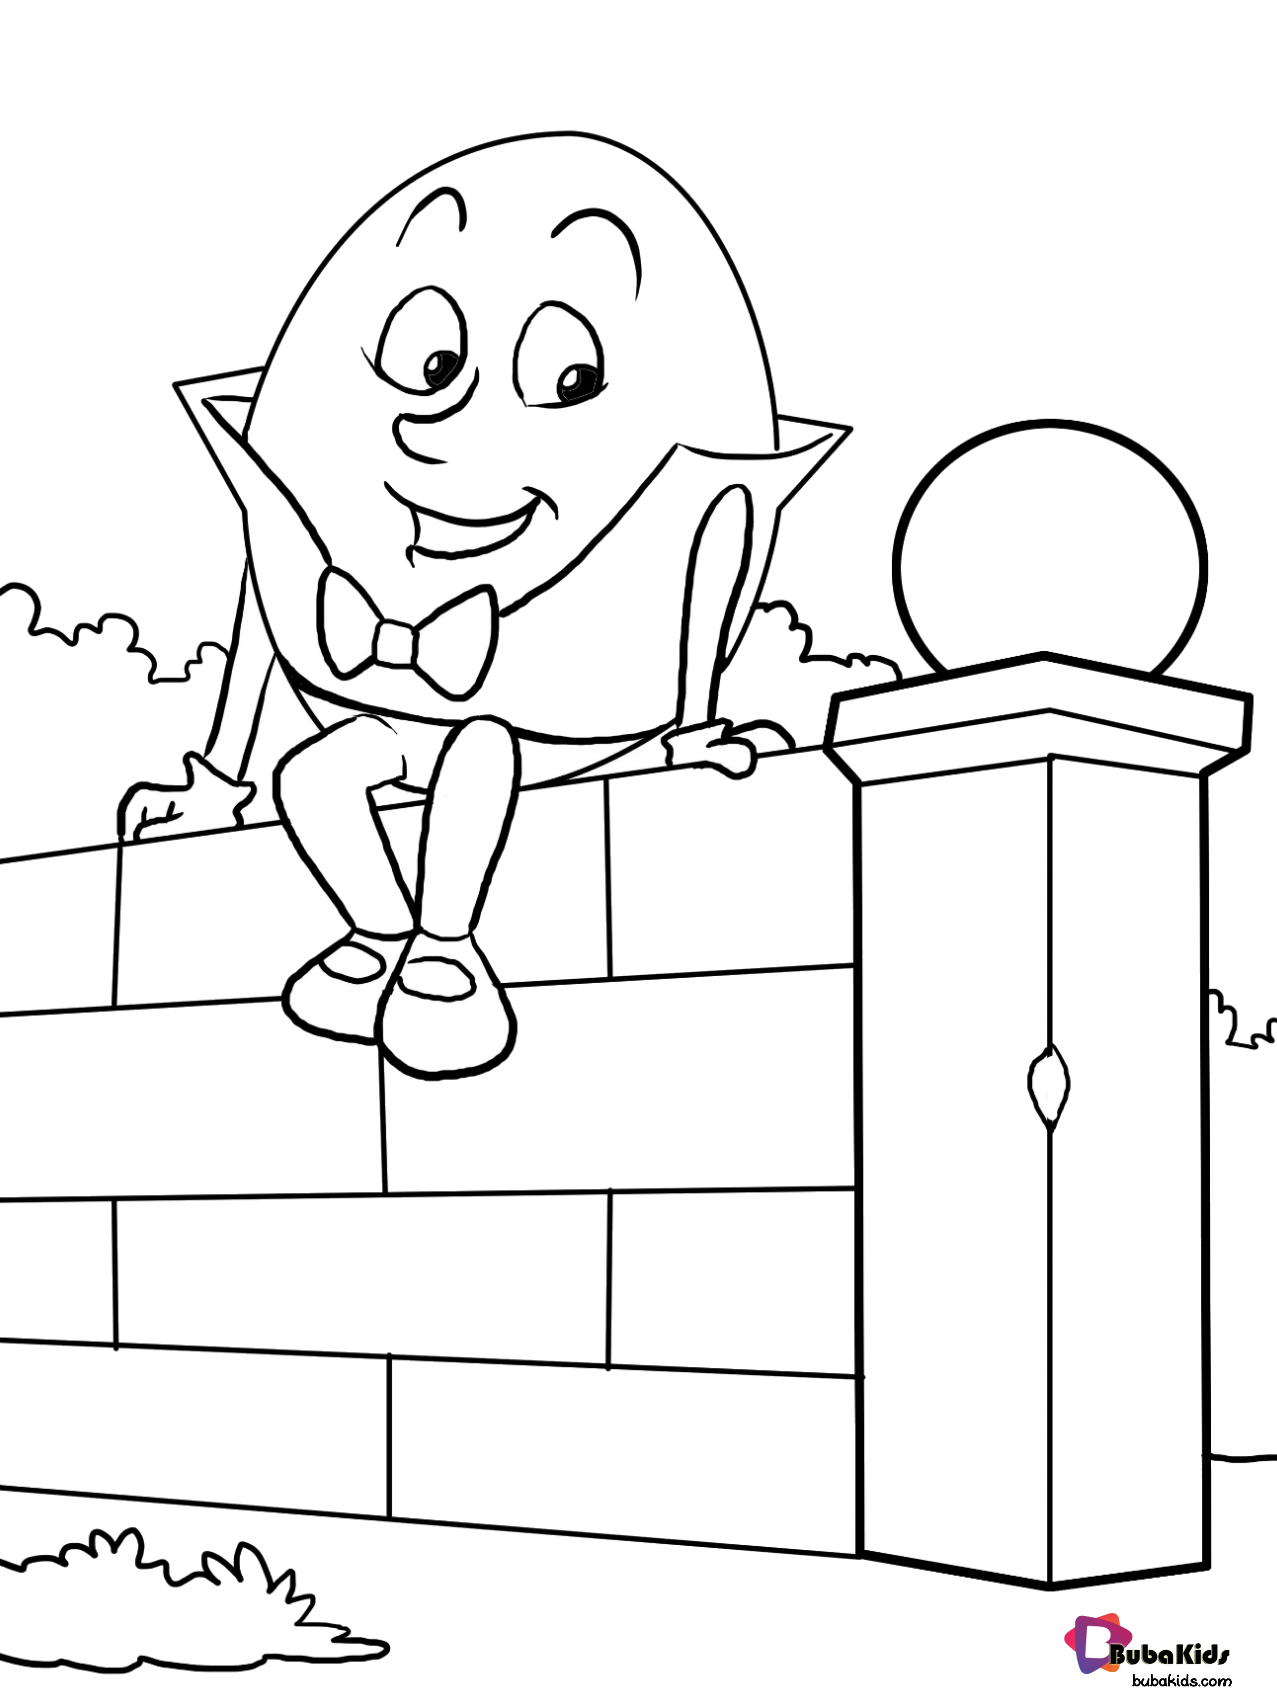 Humpty dumpty coloring page Wallpaper